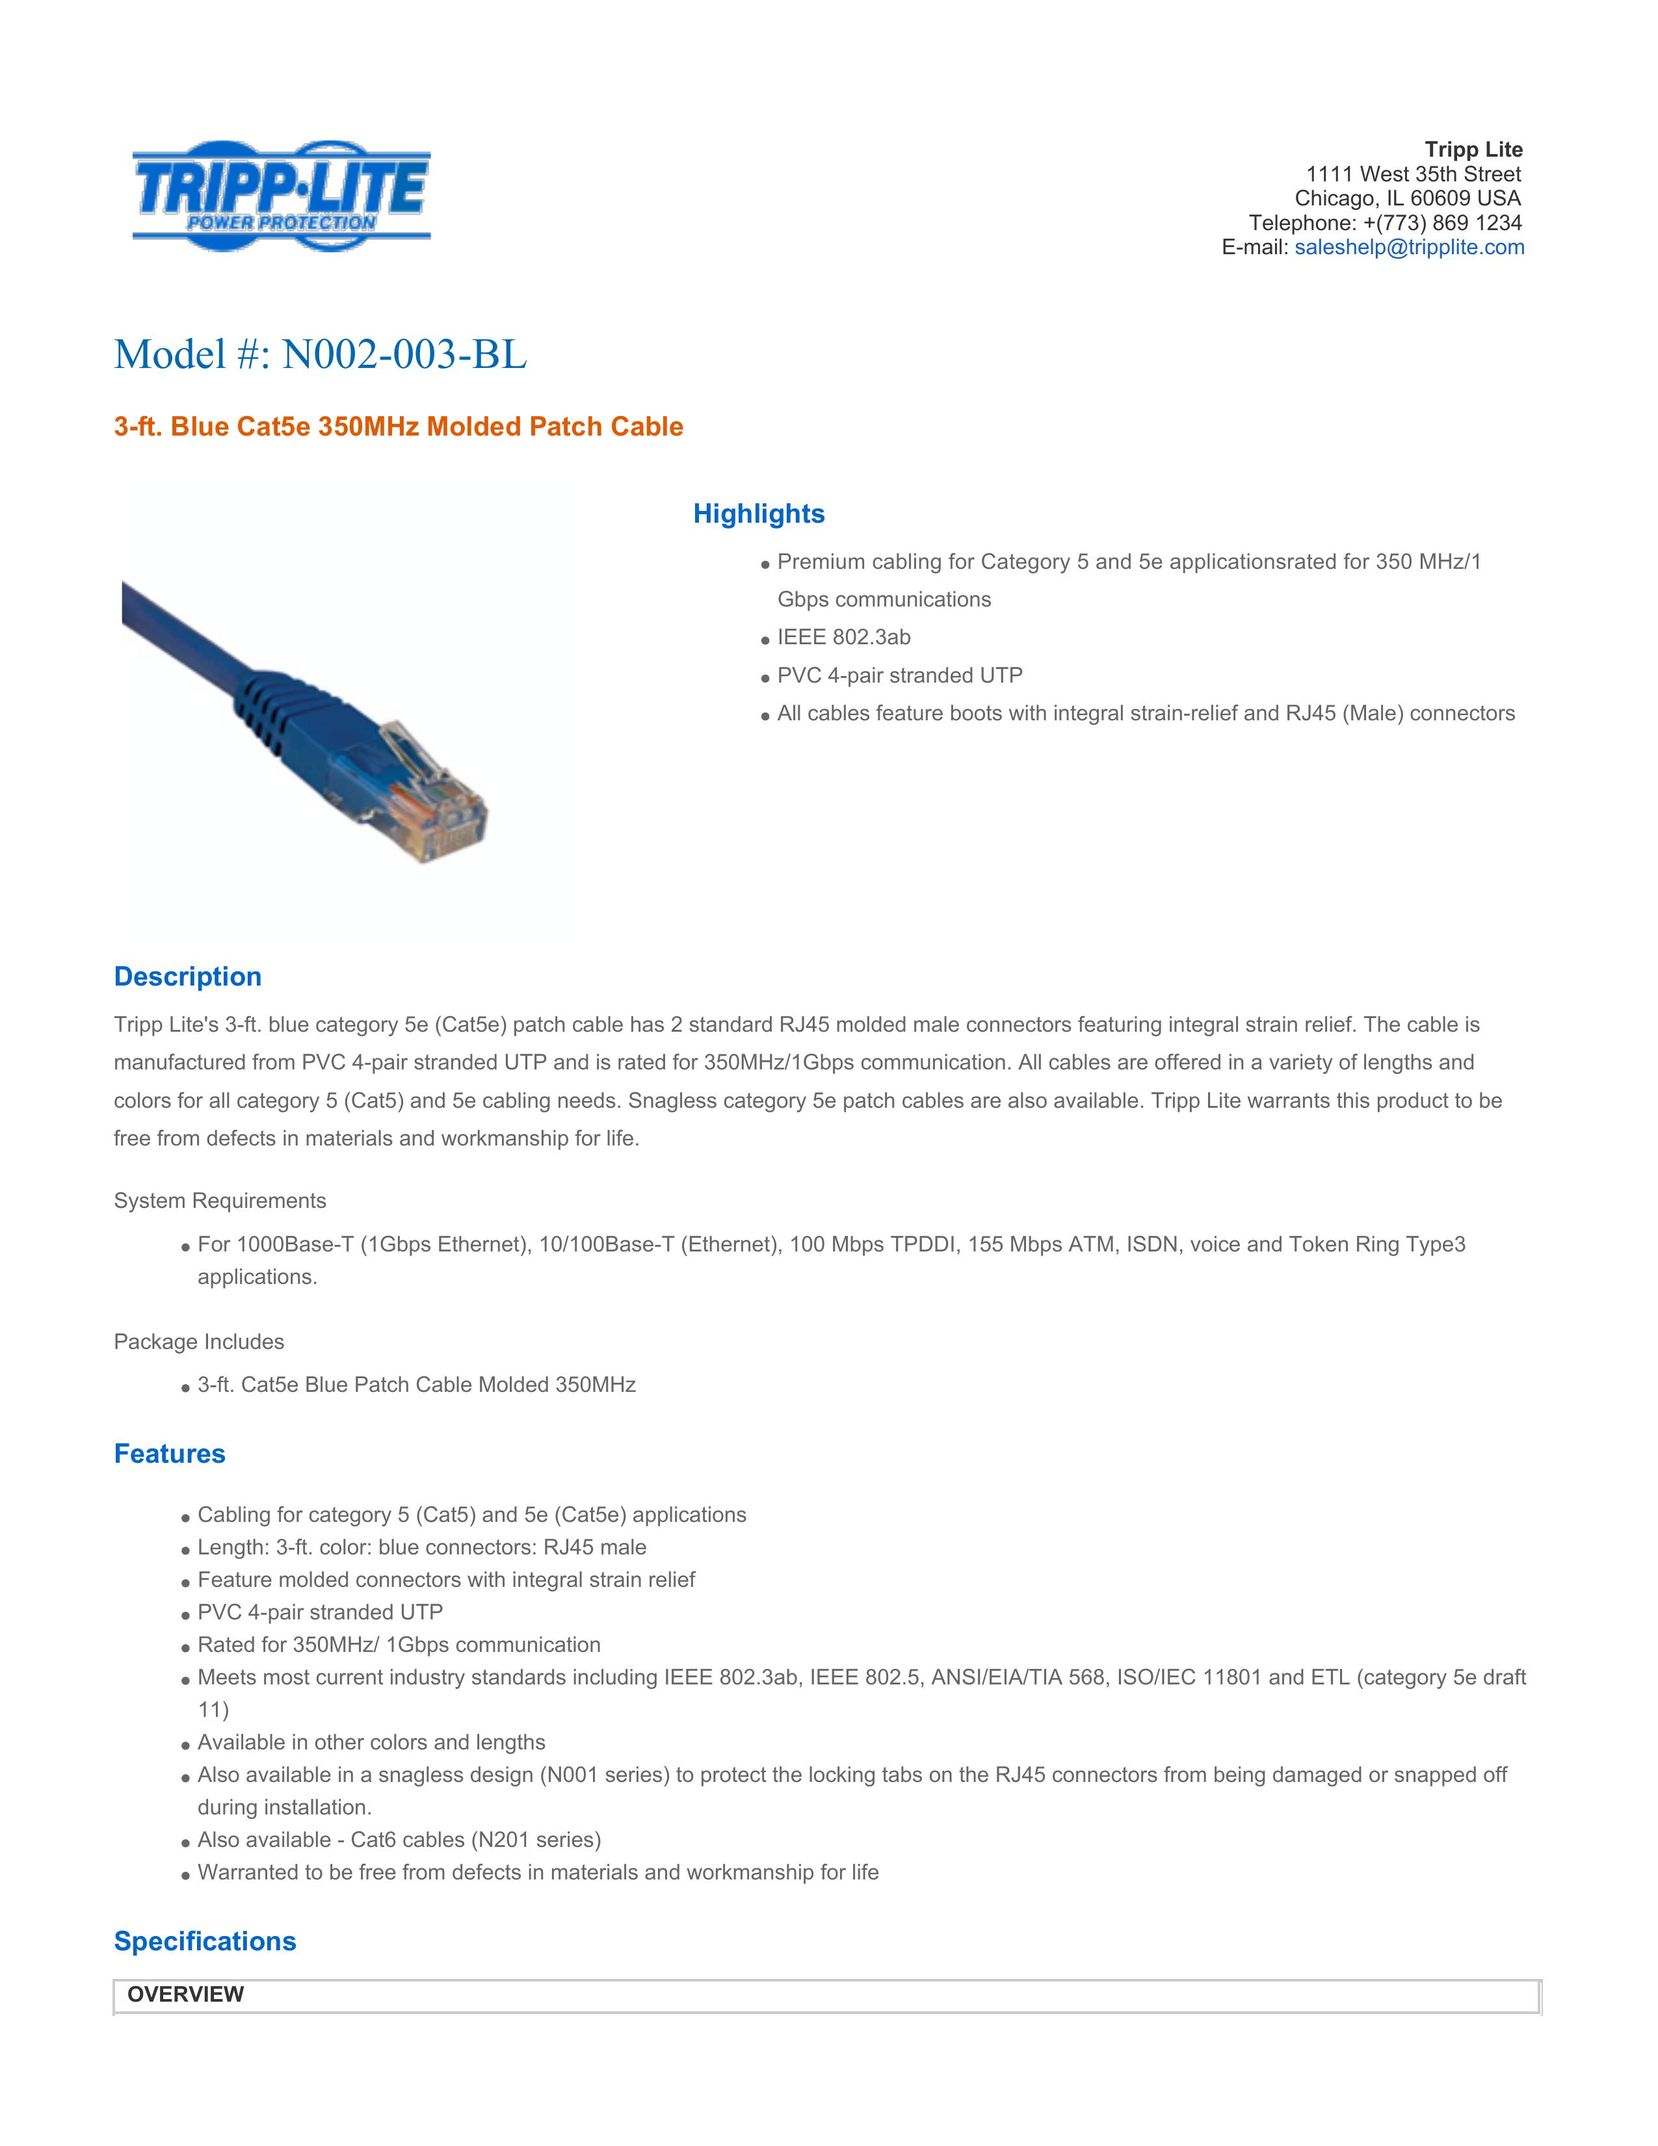 Tripp Lite N002-003-BL Network Cables User Manual